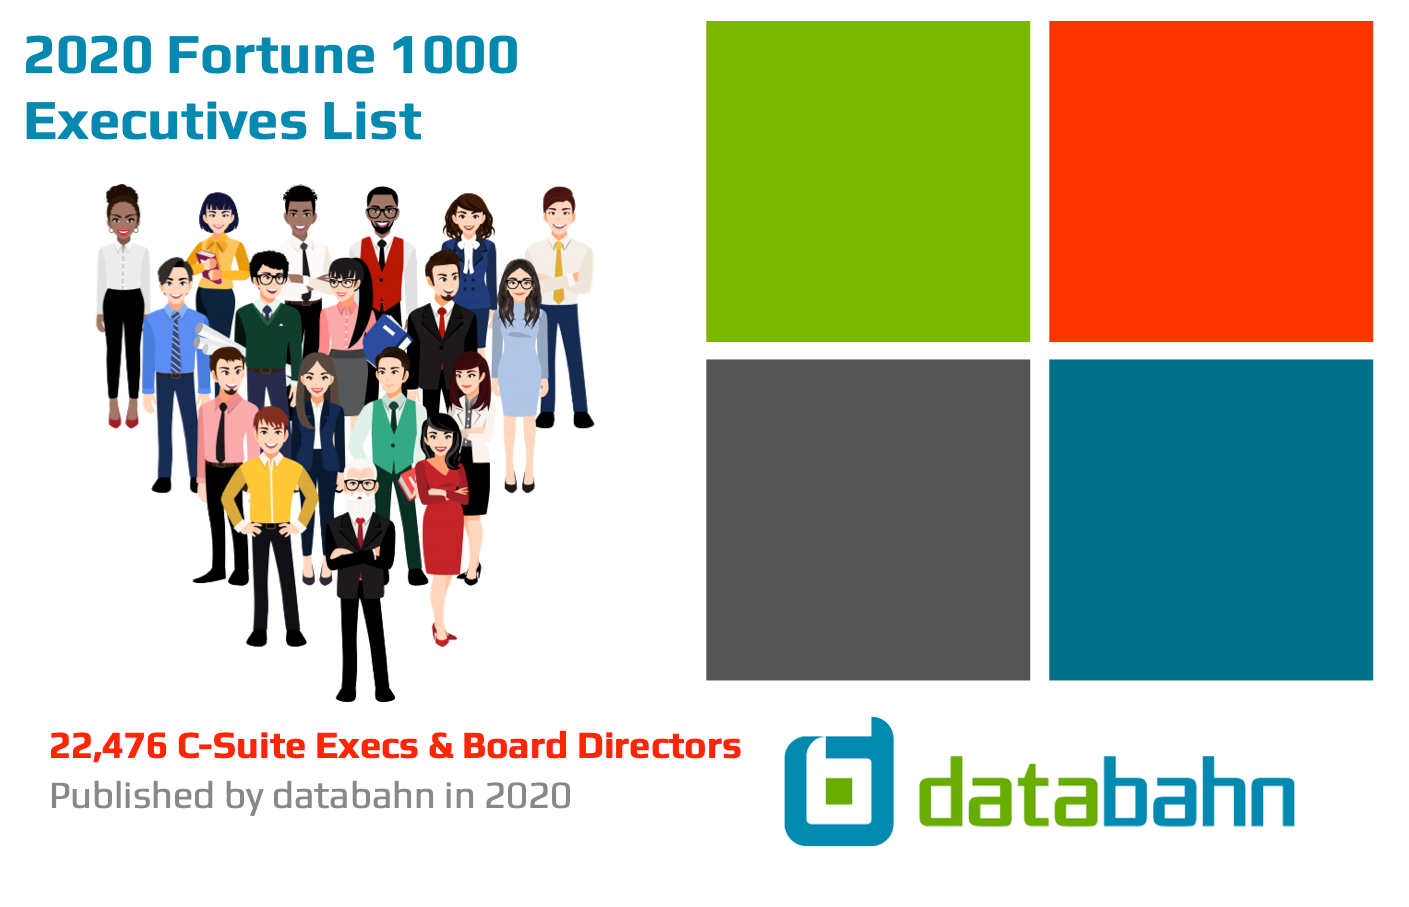 2020 Fortune 1000 Executive Contact List